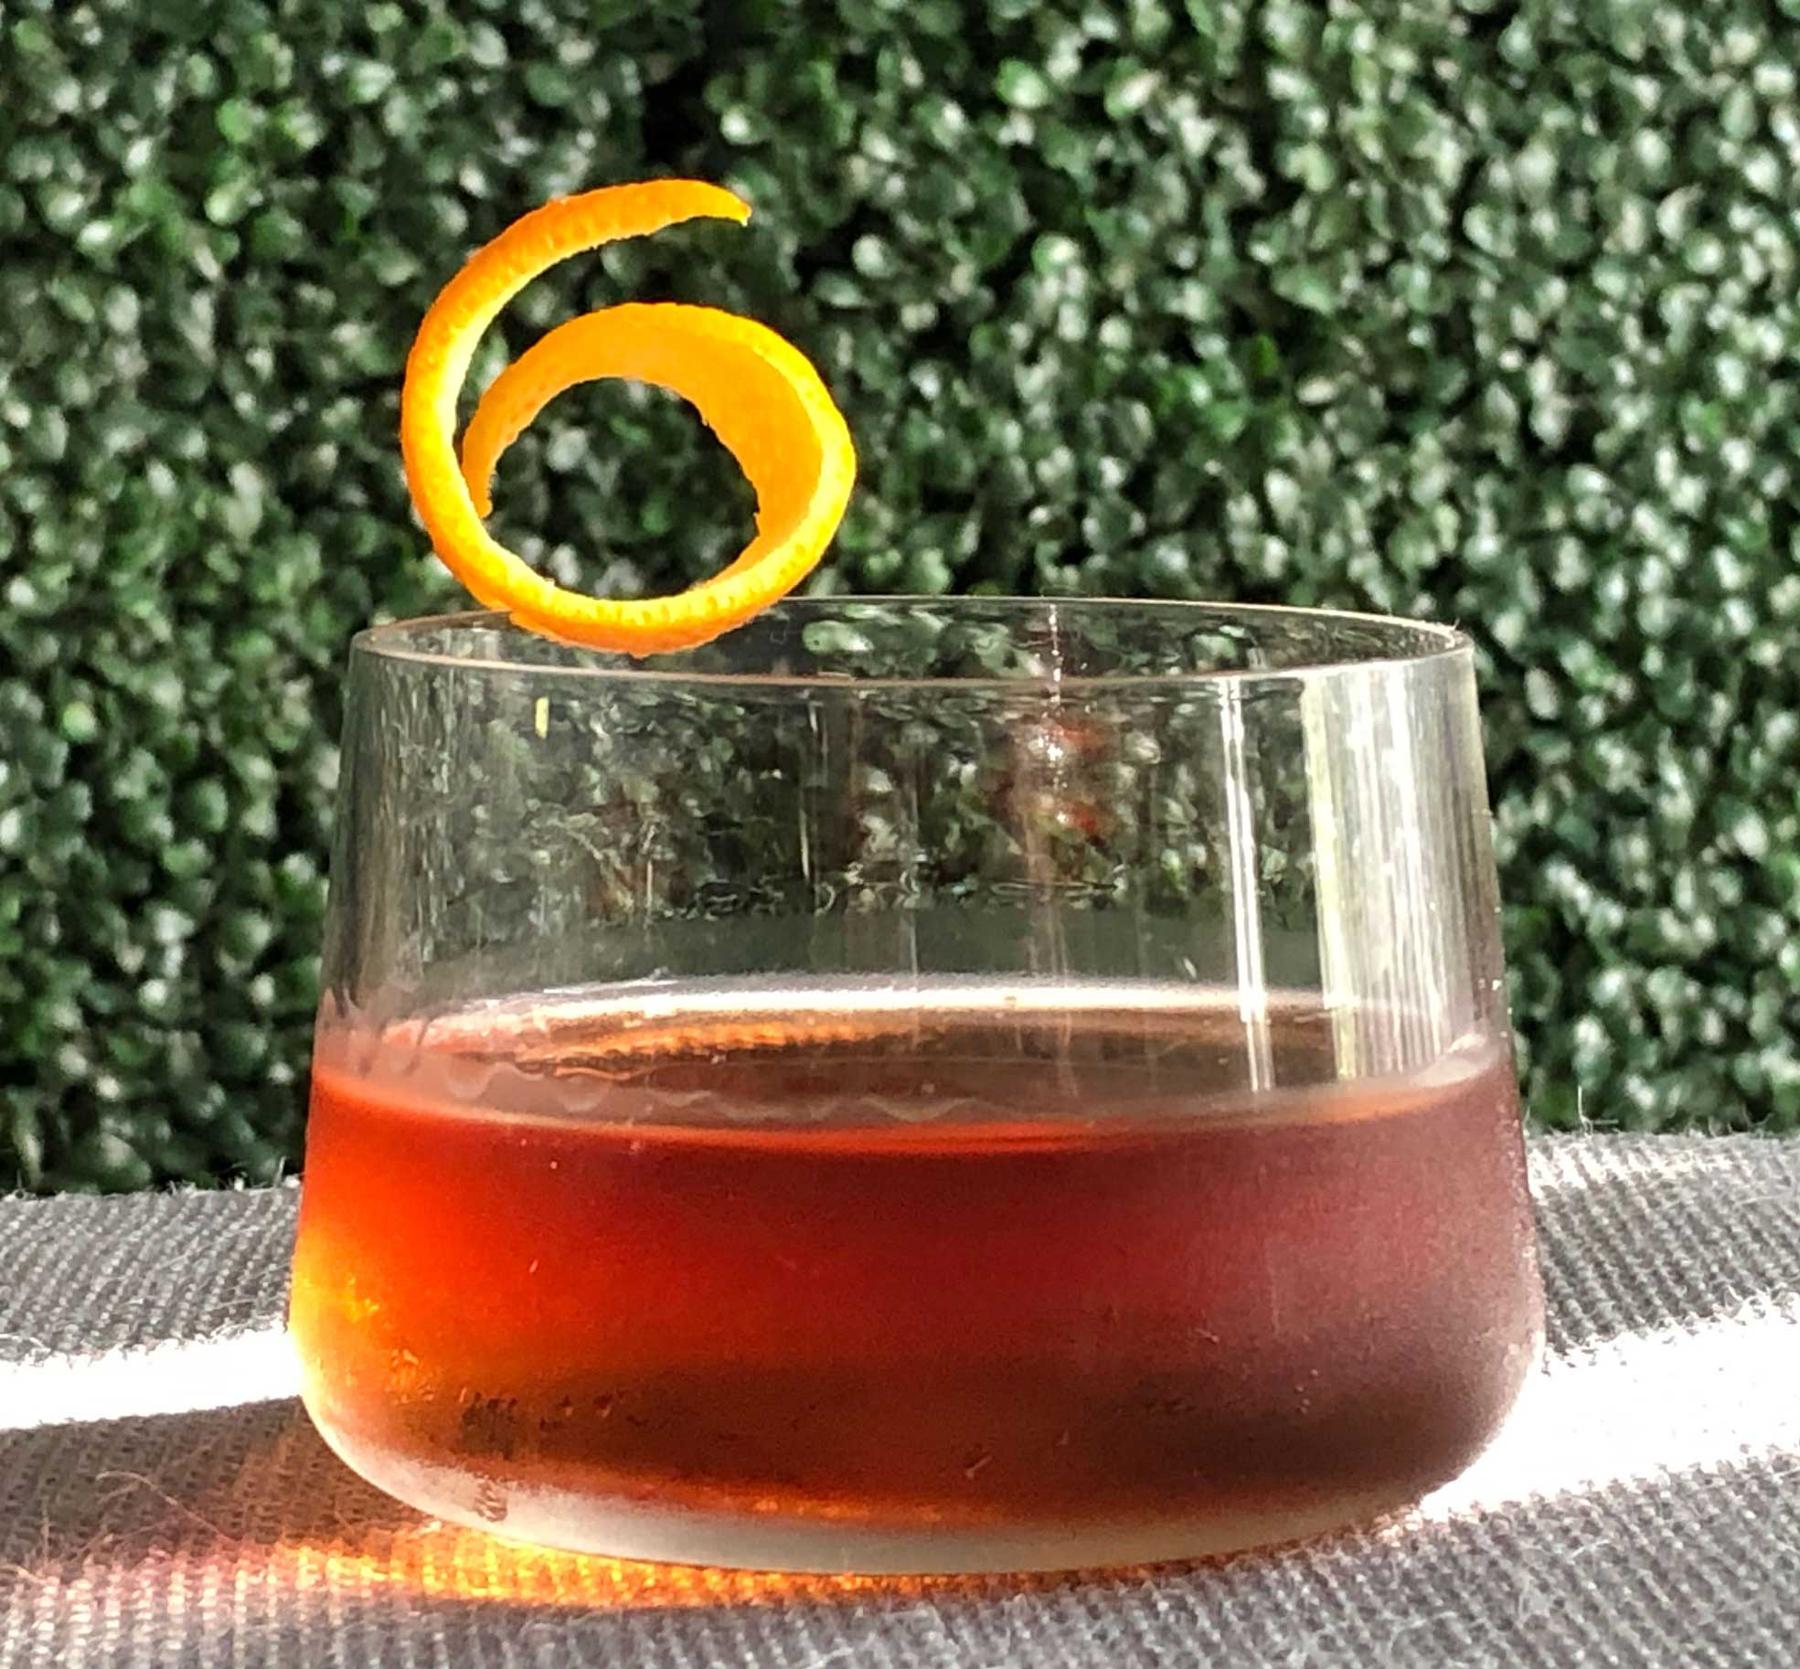 An example of the Pat’s Old Friend, the mixed drink (drink), adapted from the Pat’s Special, Savoy Cocktail Book, featuring Bonal Gentiane-Quina, Hayman’s Old Tom Gin, Mas Peyre Rancio Sec “Le Démon de Midi”, grenadine, Rothman & Winter Orchard Apricot Liqueur, and orange twist; photo by Lee Edwards